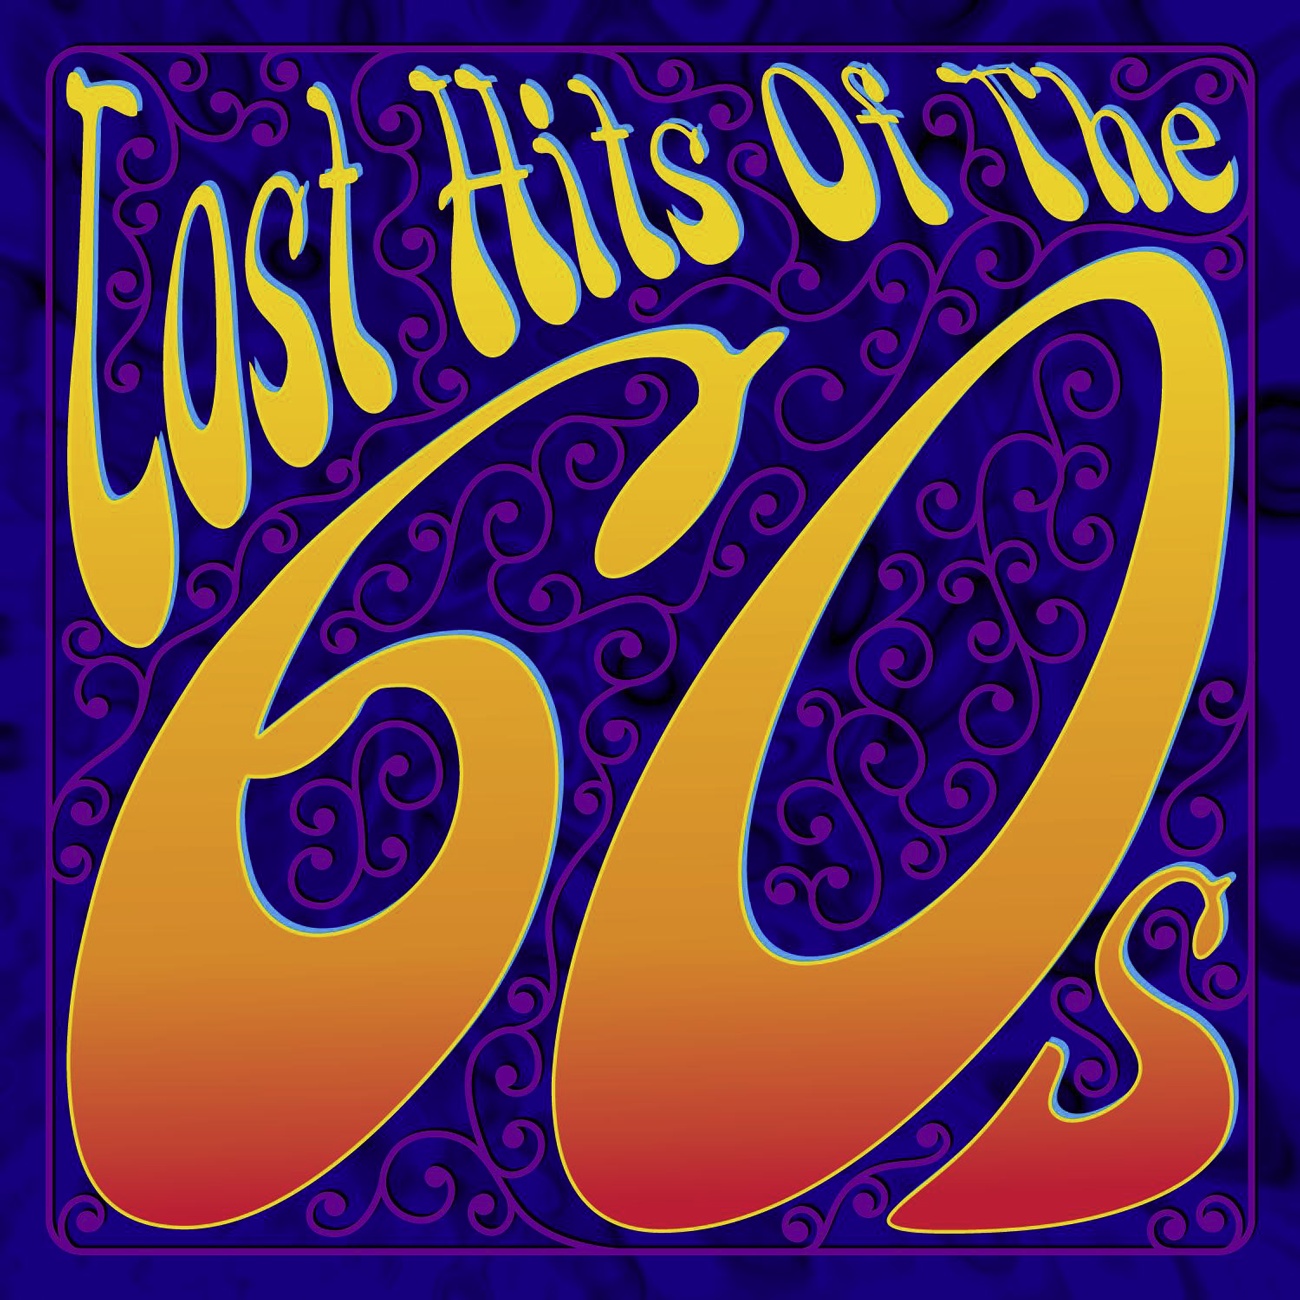 Lost Hits Of The 60's (All Original Artists & Versions)